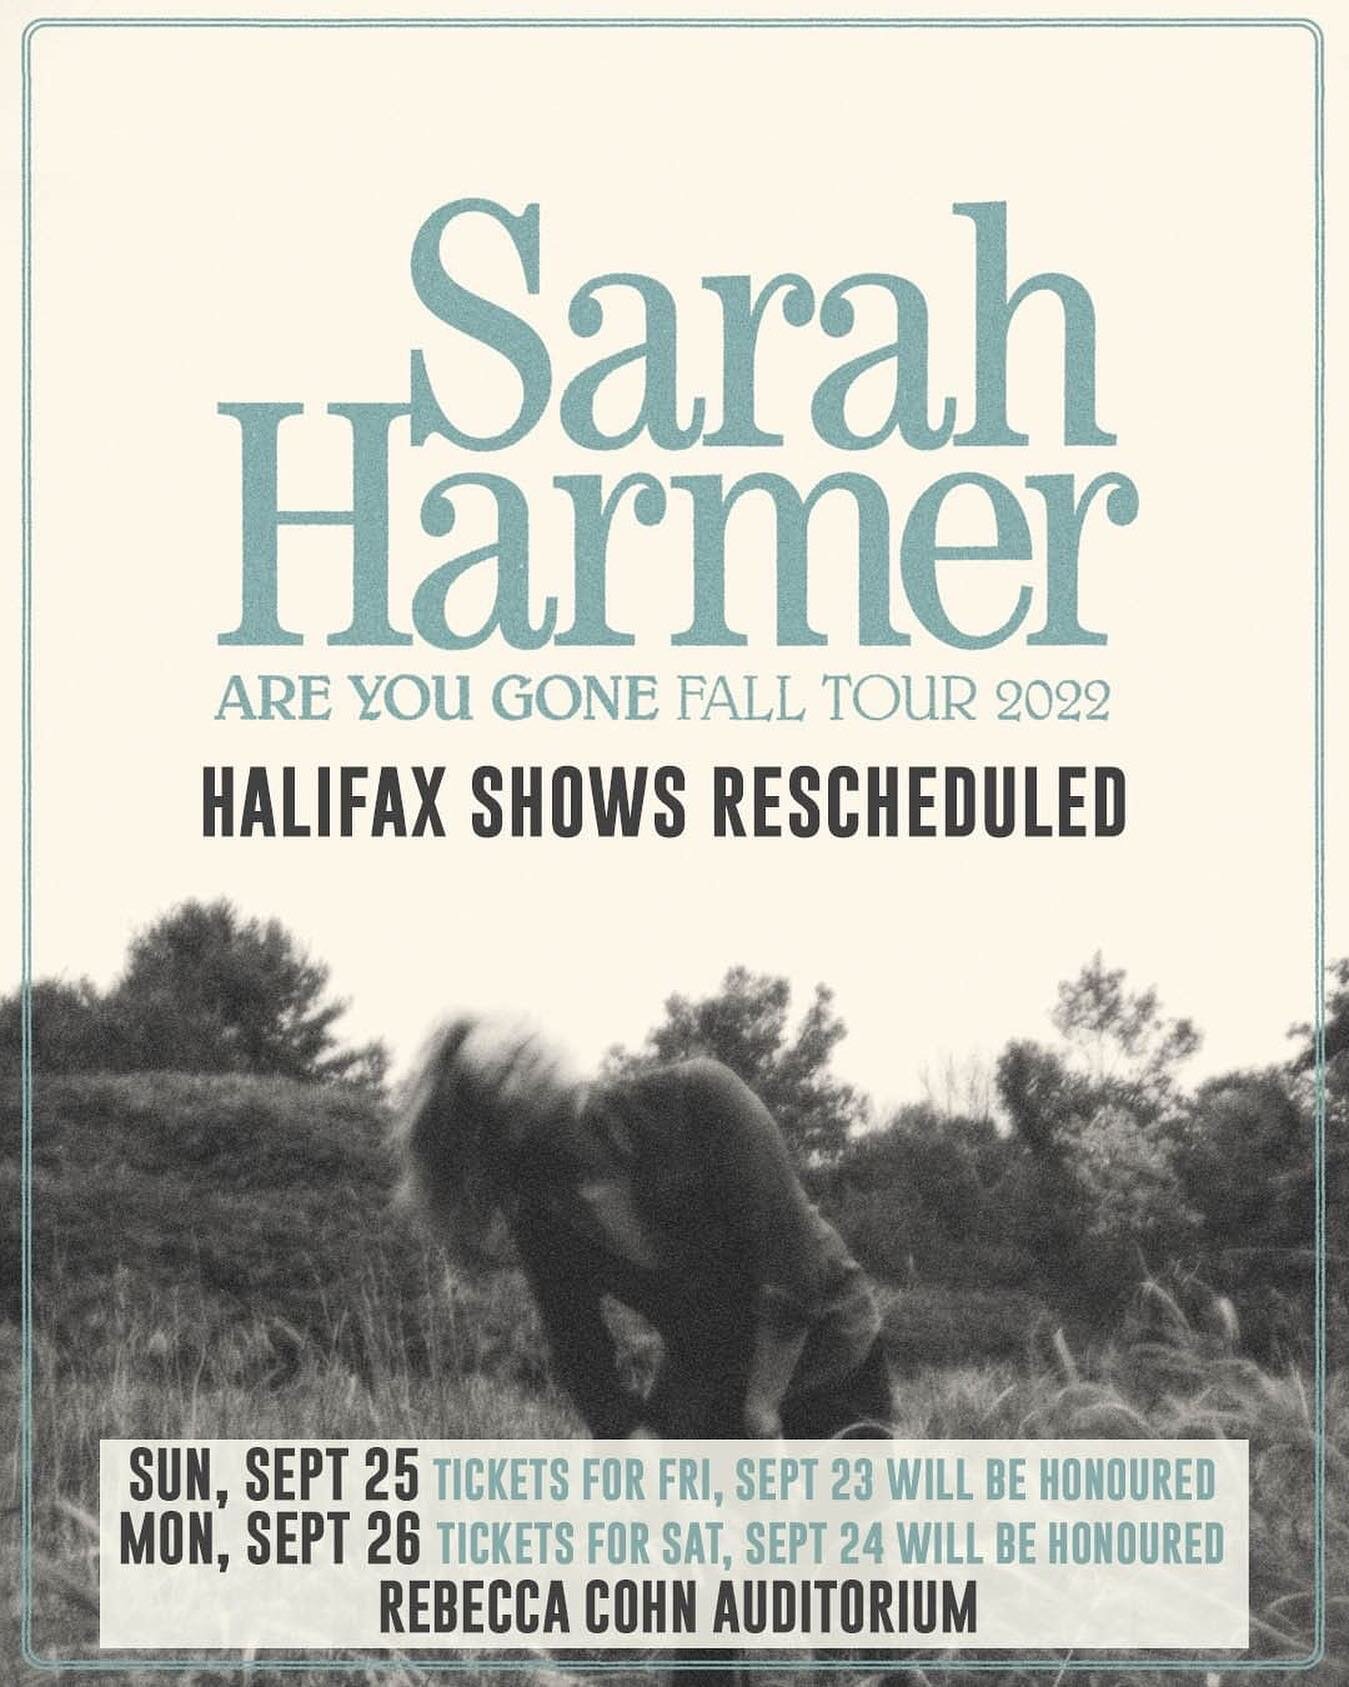 🚨 Due to the impending weather event, @yoharmer&rsquo;s shows scheduled for Friday, Sept. 23 and Saturday, Sept. 24 at the @dalartscentre (Rebecca Cohn Auditorium) in Halifax, NS have been rescheduled as follows:

Sunday, Sept. 25 - tickets for Frid